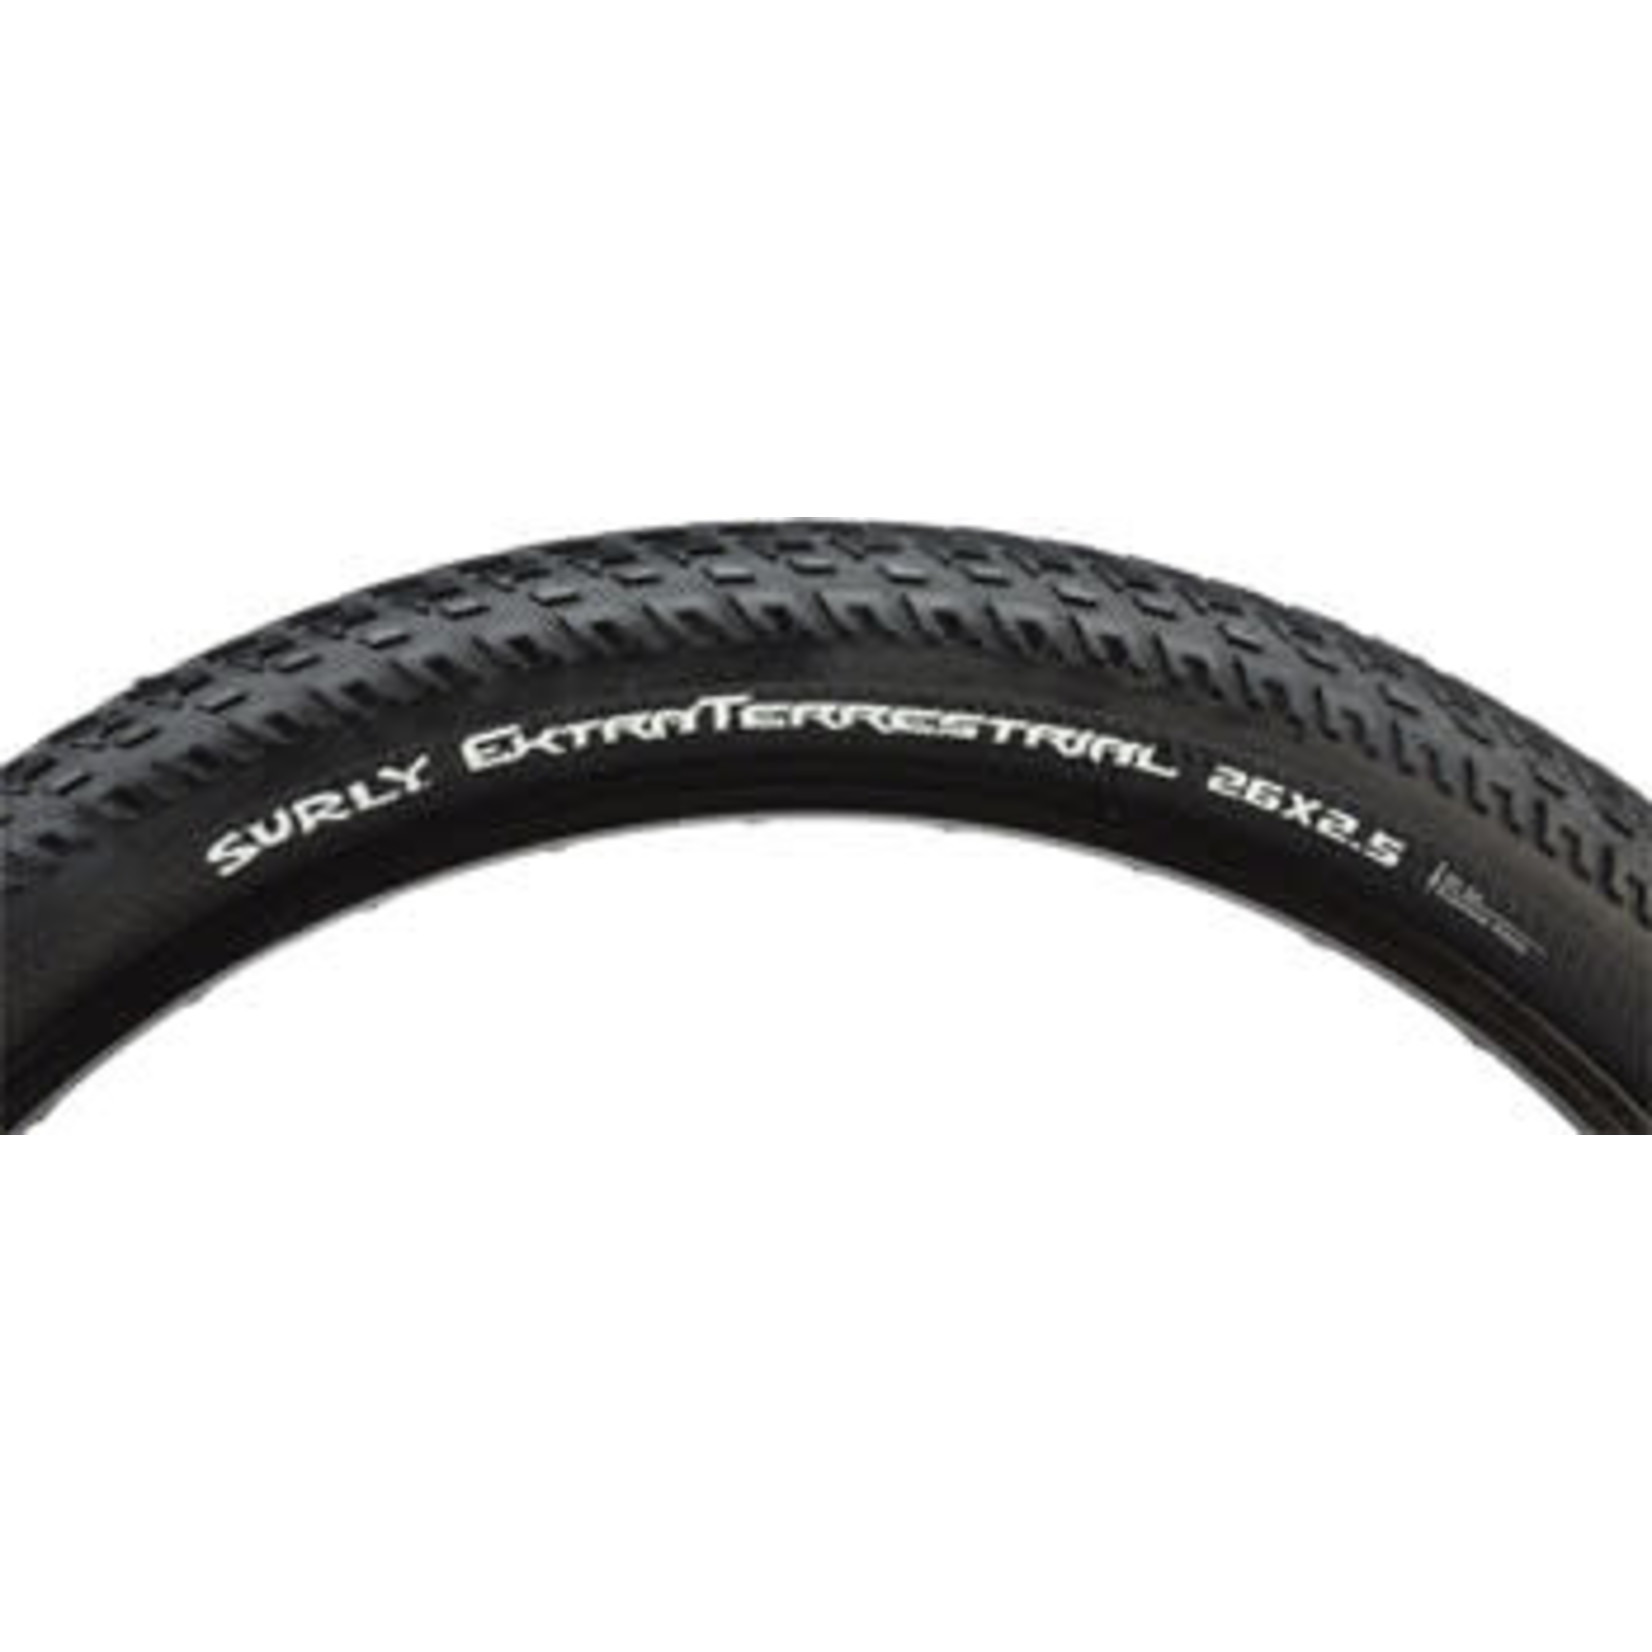 Surly Surly ExtraTerrestrial 26x2.5" 60tpi Tire Plus Protection